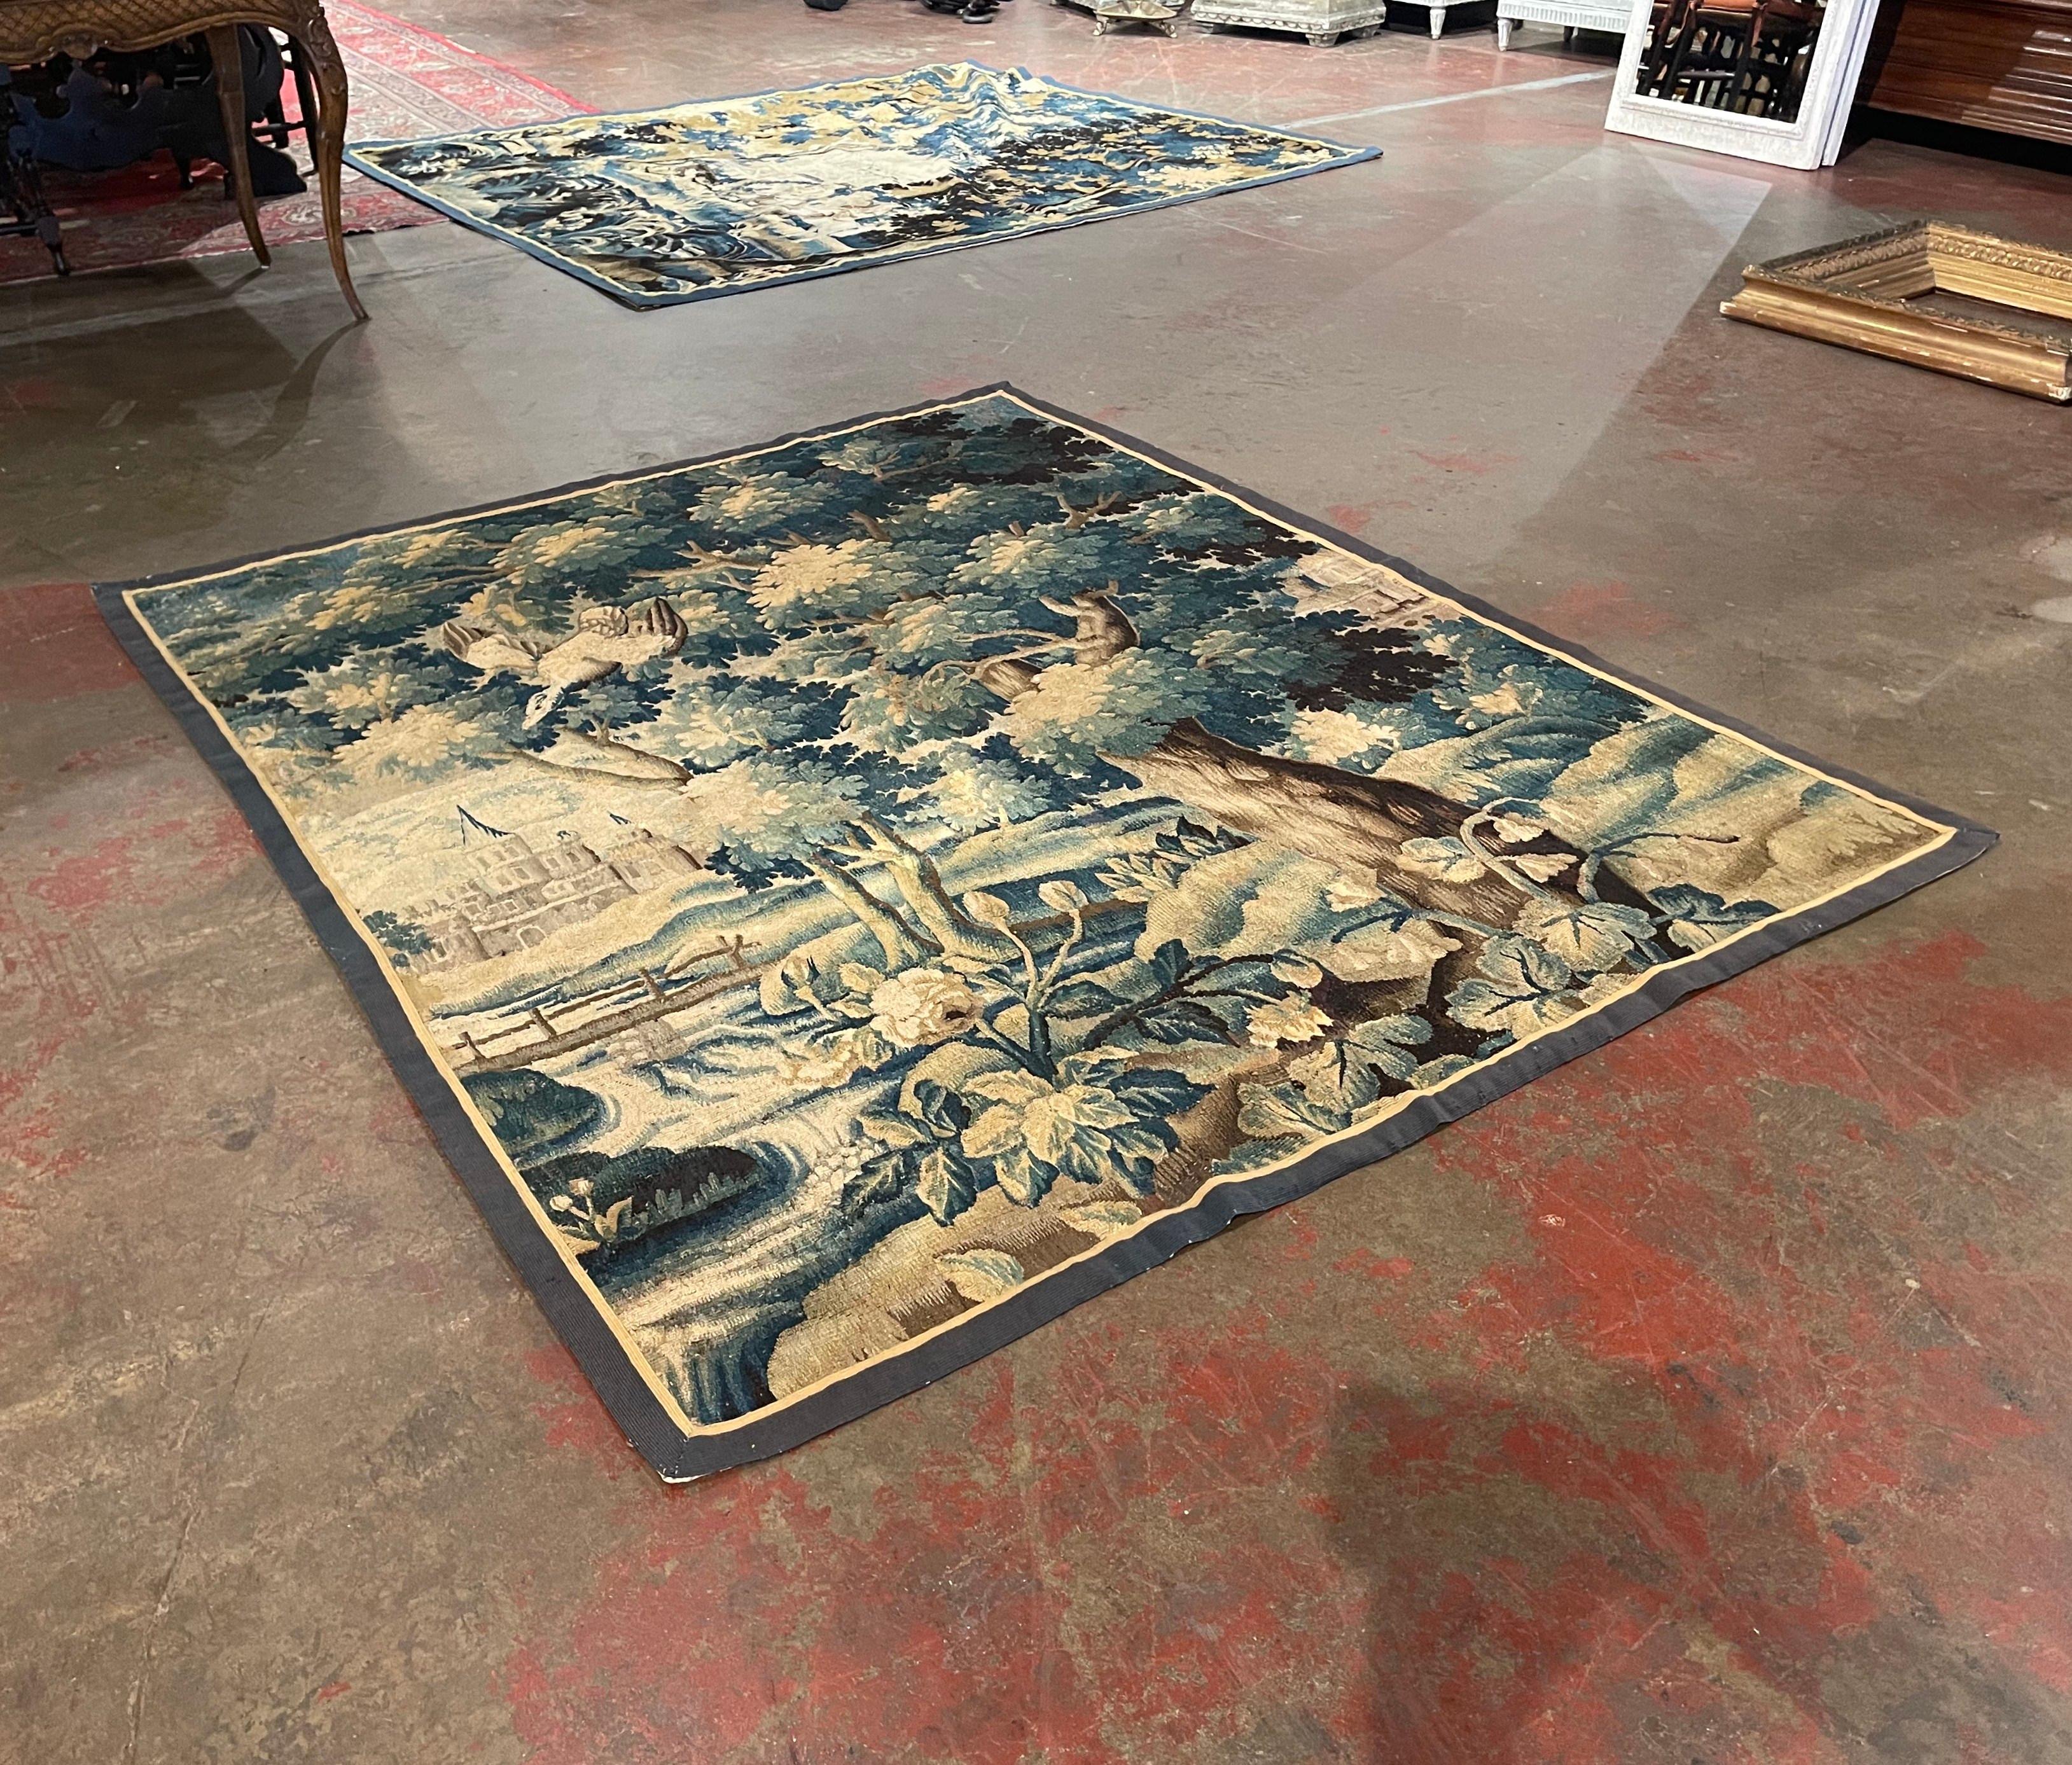 This antique tapestry was handwoven in Aubusson, France, circa 1760. Rectangular in shape, the colorful wall decor depicts a wooded landscape scene with a large, mature tree in the foreground, with a stream, a small bridge, and two castles in the